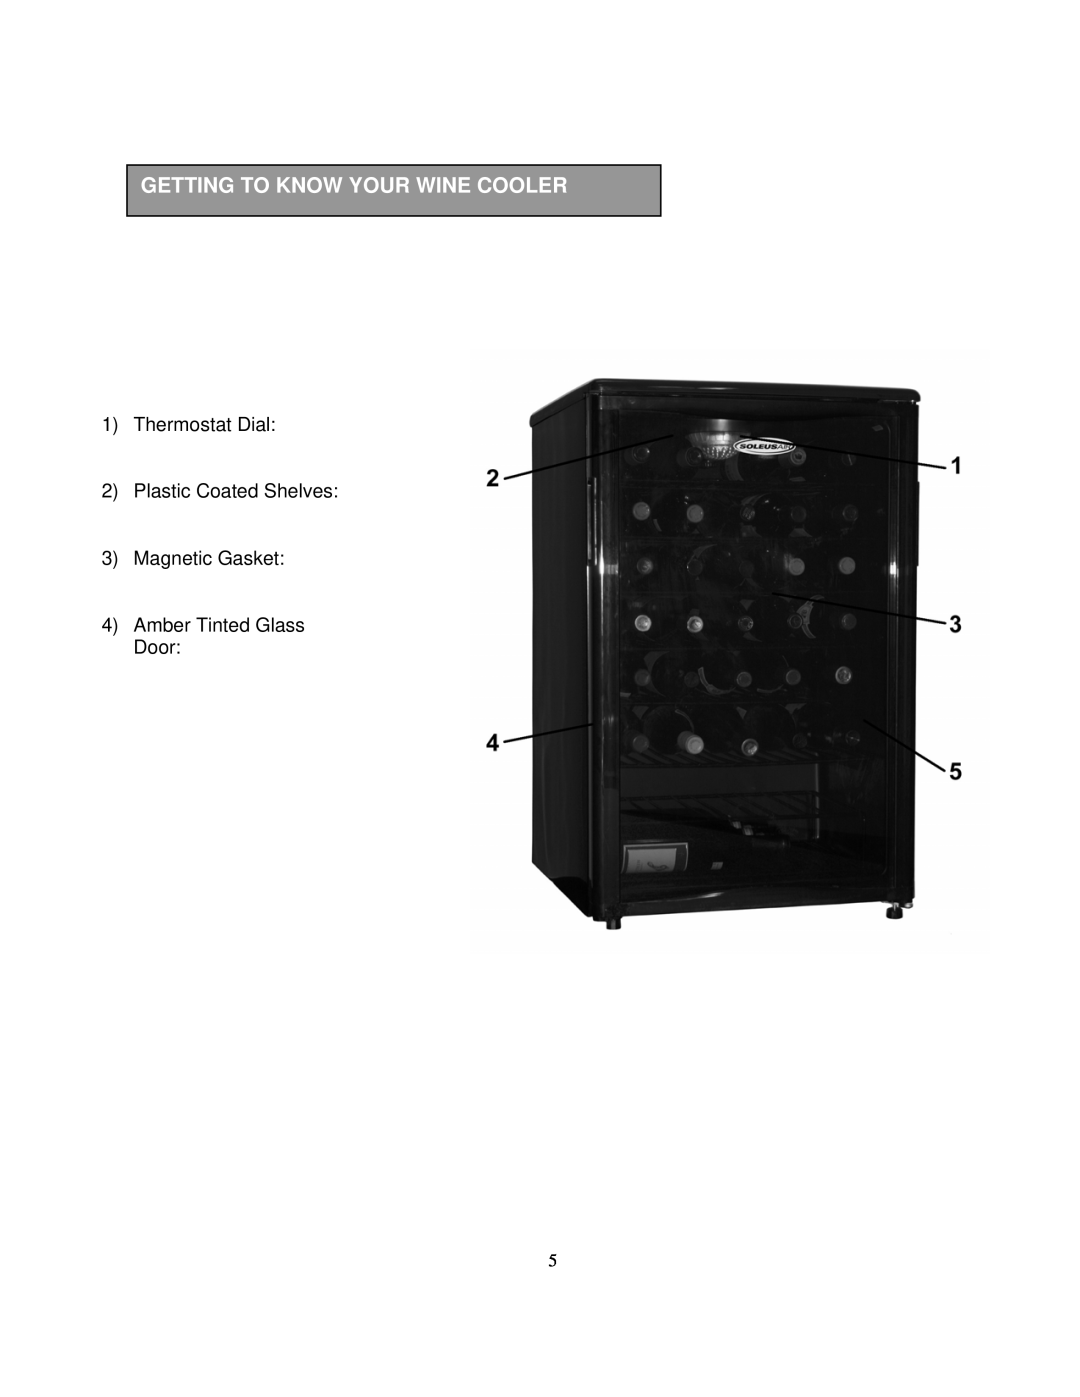 Soleus Air JC-128 owner manual Getting To Know Your Wine Cooler, 1Thermostat Dial 2Plastic Coated Shelves 